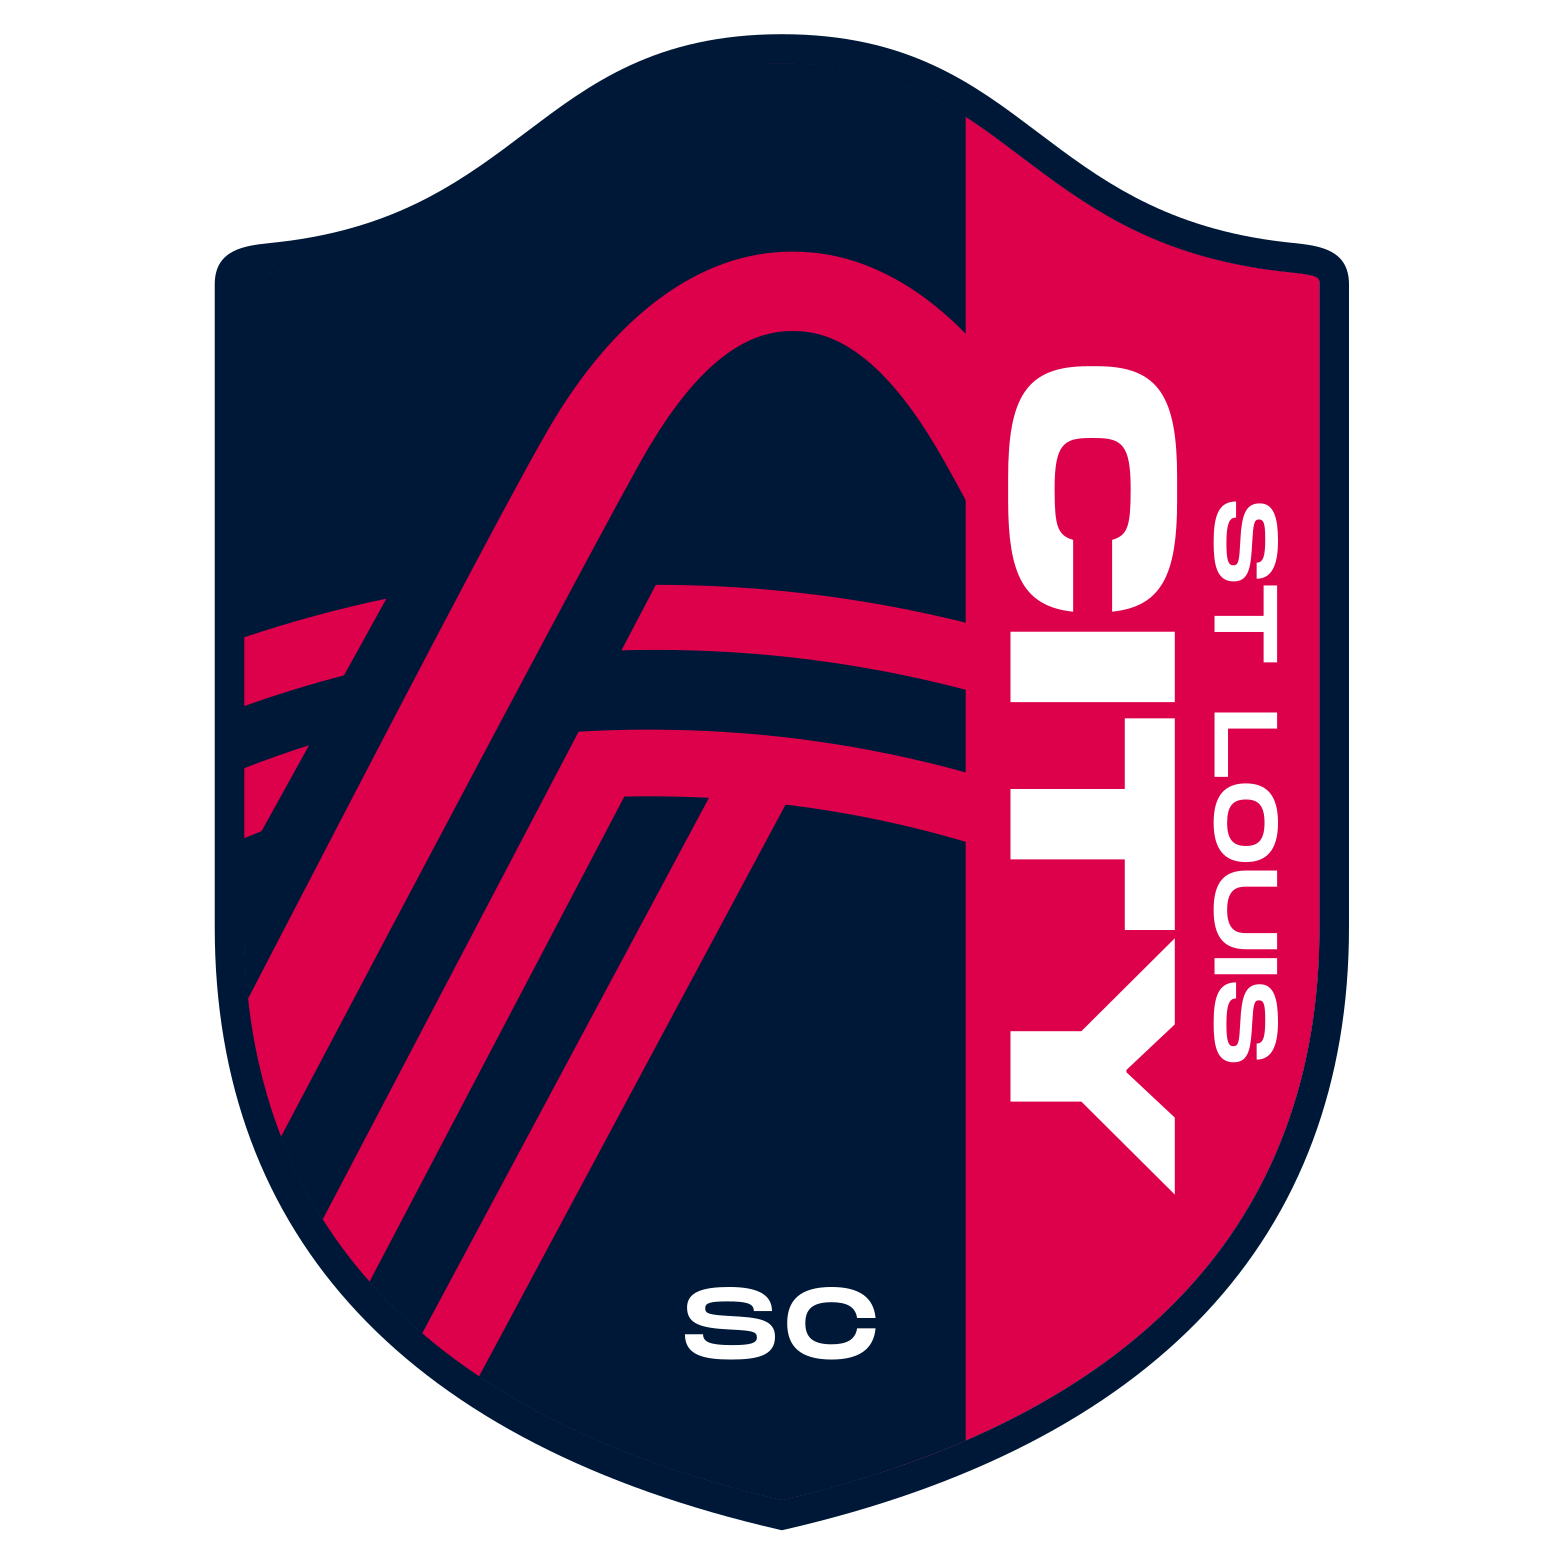 St. Louis City vs Chicago Fire Prediction: Low scoring draw is most likely 